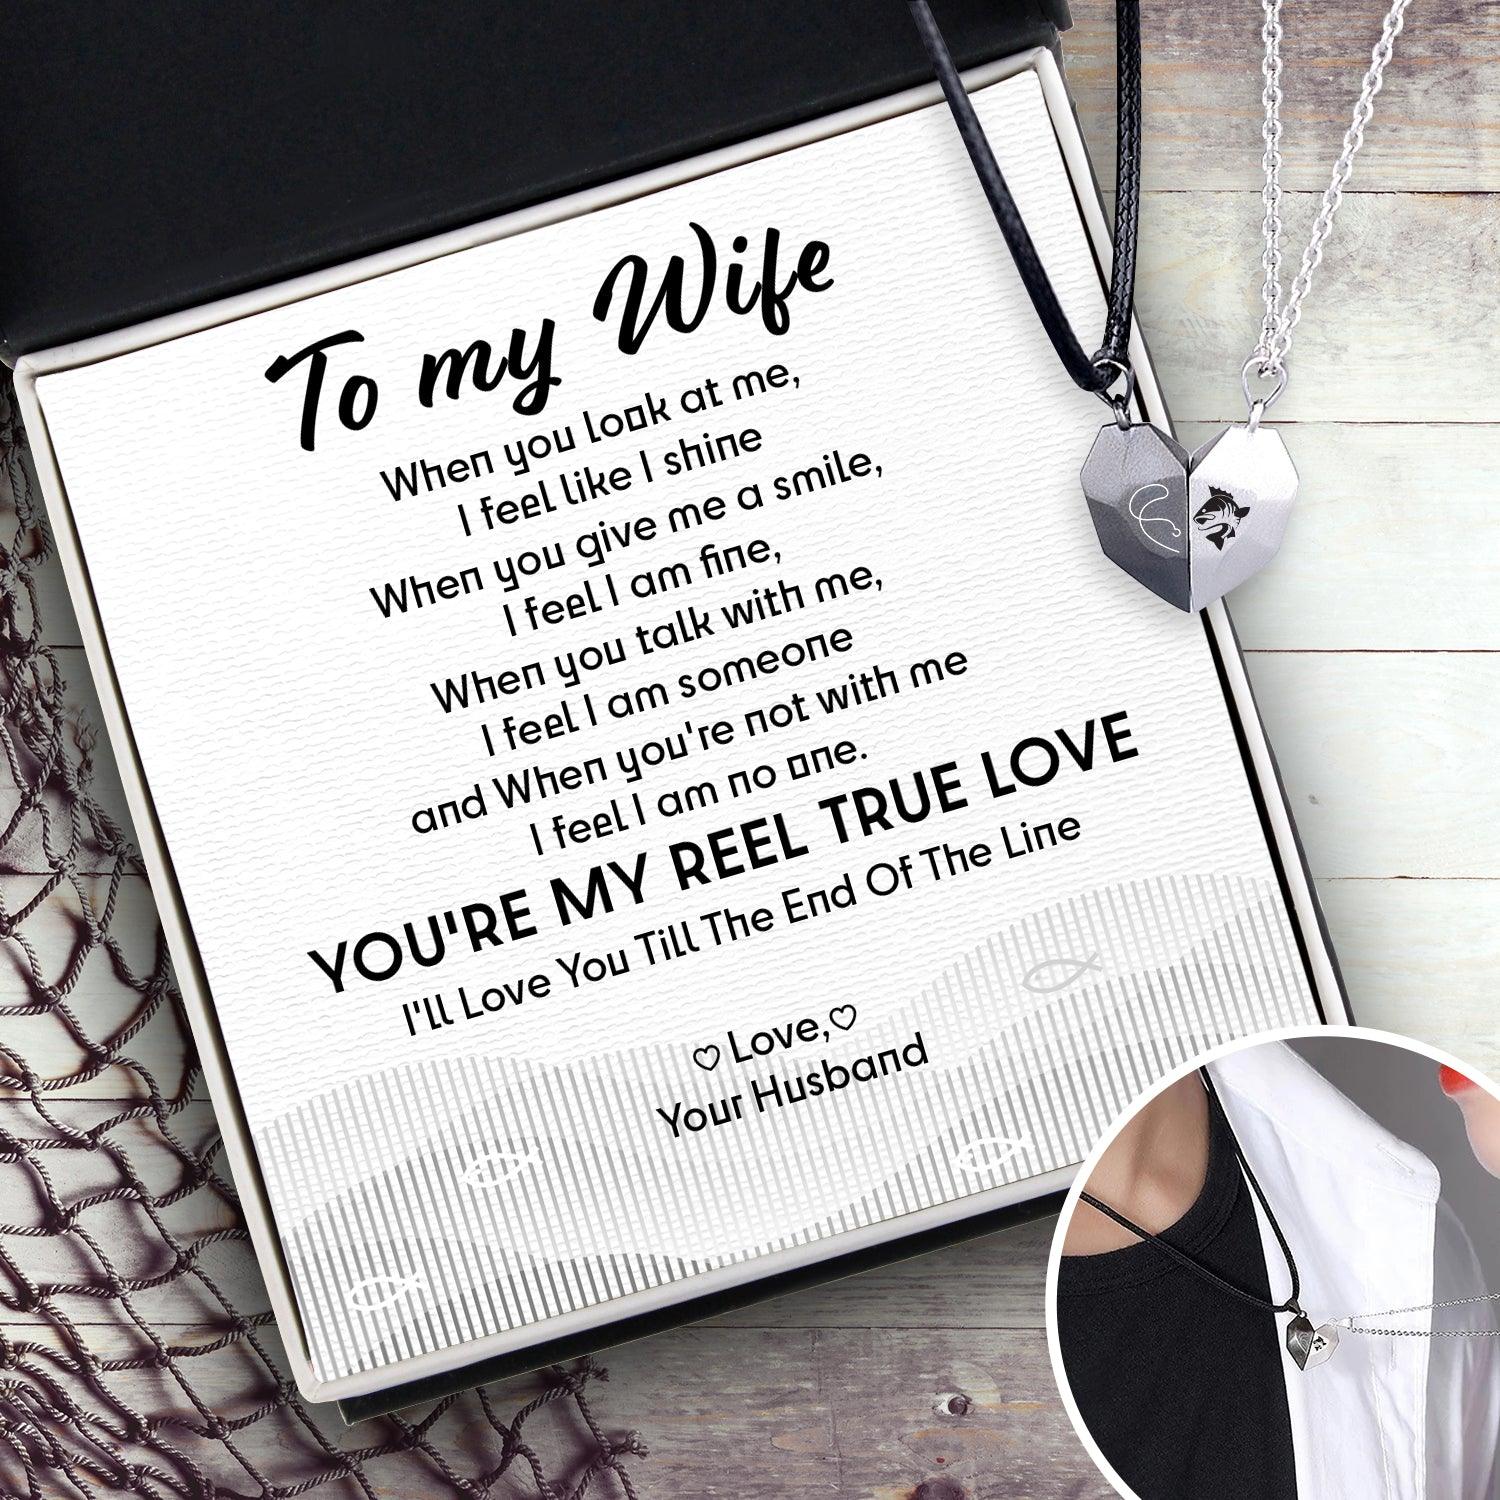 Magnetic Love Necklaces - Fishing - To My Wife - You're My Reel True Love - Augnni15003 - Gifts Holder